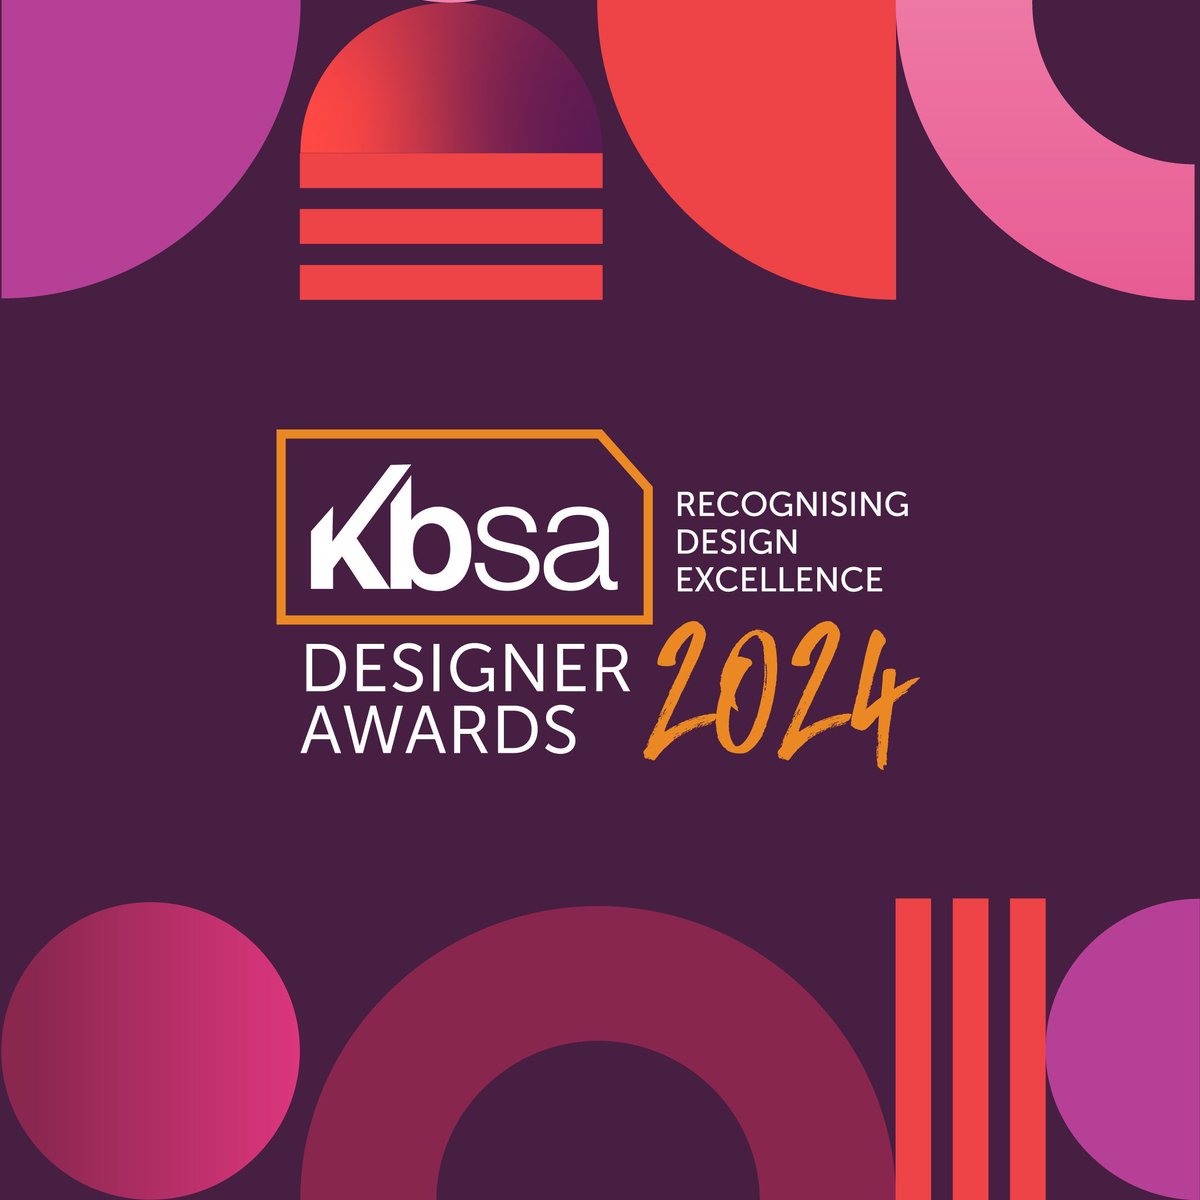 📣 Attention Kbsa Designers! The entries for this year's Kbsa Designer Awards are now open! To download your application form, visit buff.ly/47XNXJA #KbsaDesignerAwards #Kbsa #IndependentRetailers #Kitchens #Showroom #HomeImprovements #Design